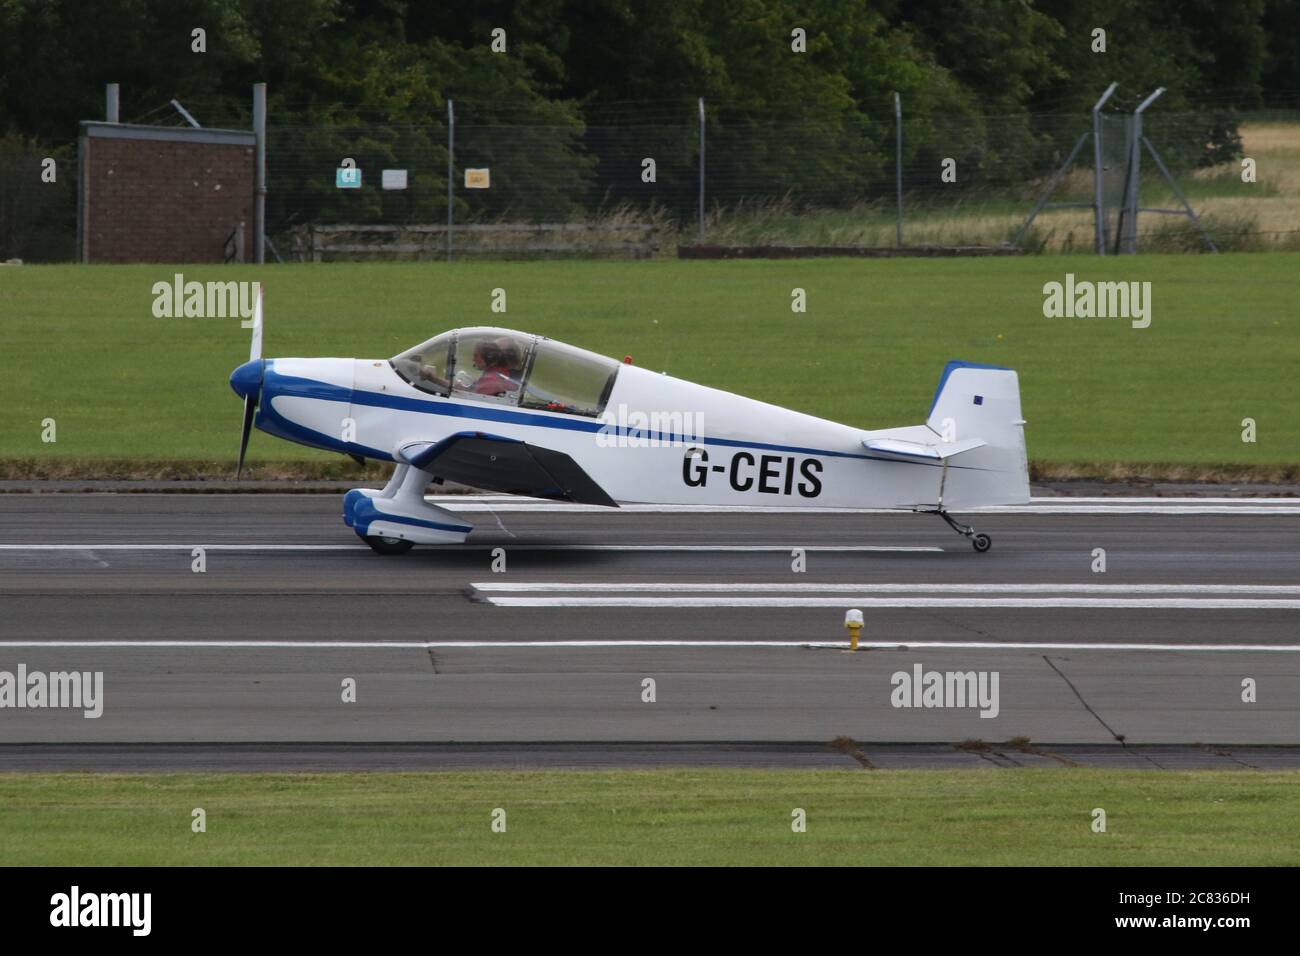 G-CEIS, a privately owned Jodel DR.1050 Ambassadeur, at Prestwick Airport in Ayrshire. Stock Photo